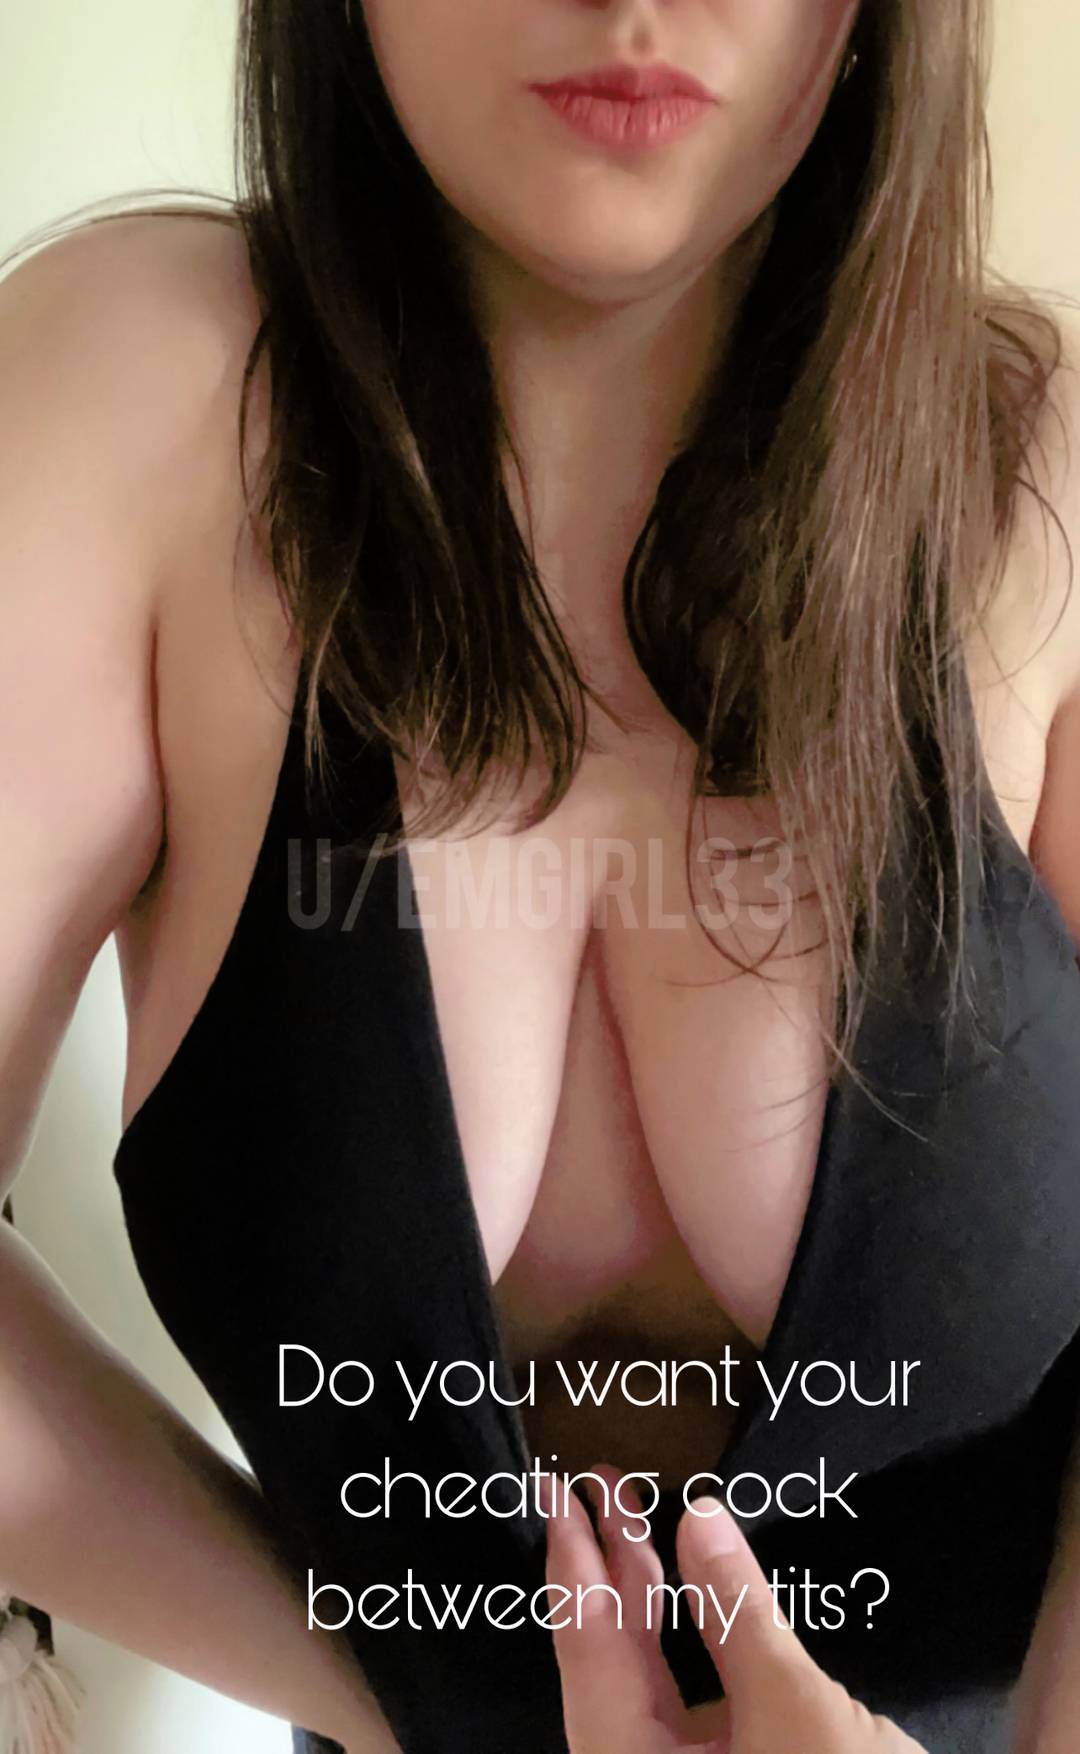 I want your cum all over my tits Scrolller